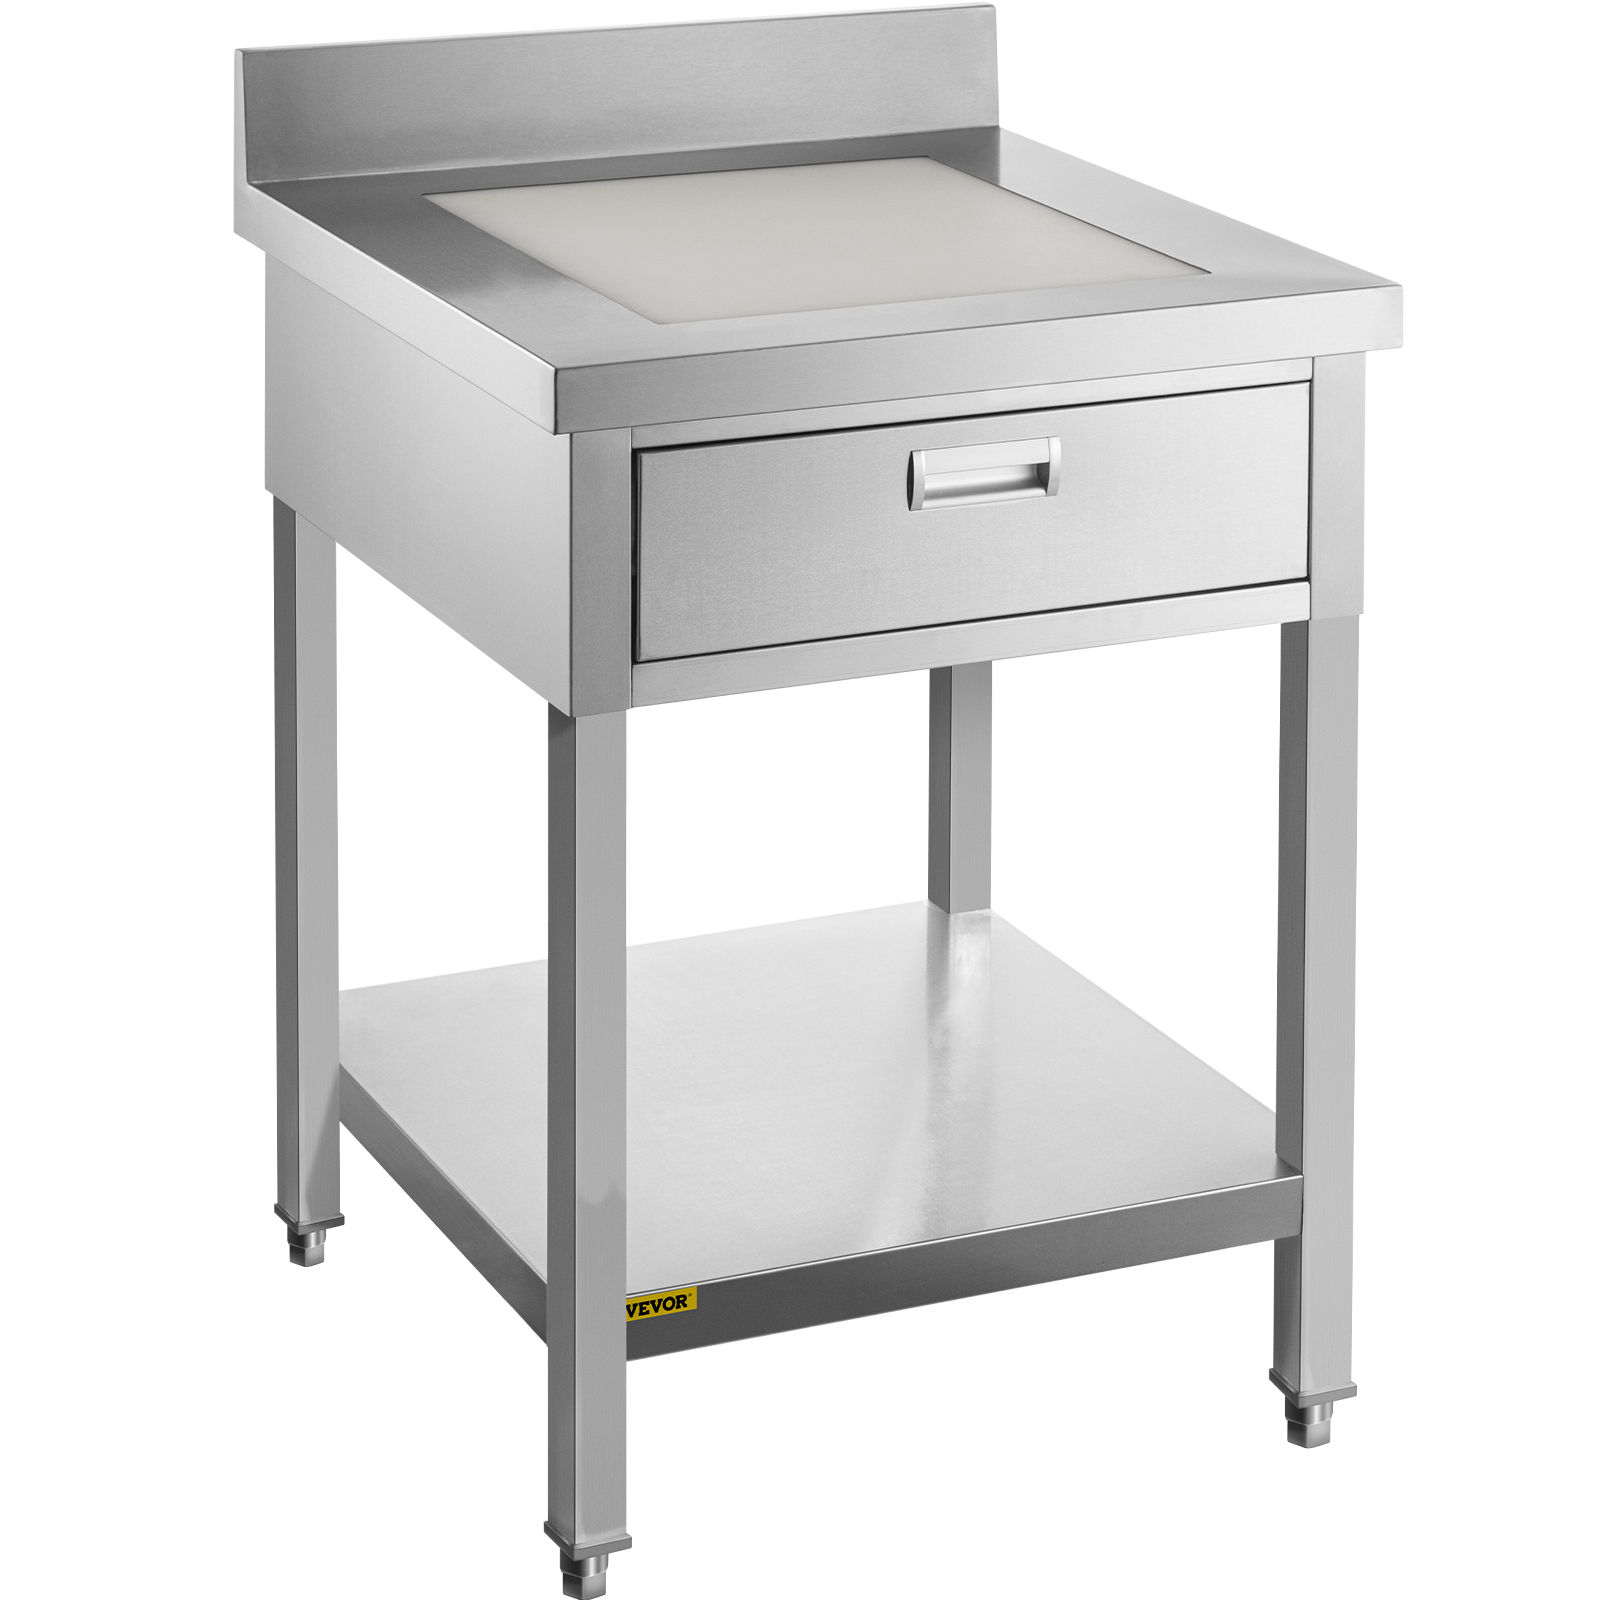 Vevor 24x24 In Single Drawer Food Pre Work Table Stainless Steel Table Workbench от Vevor Many GEOs